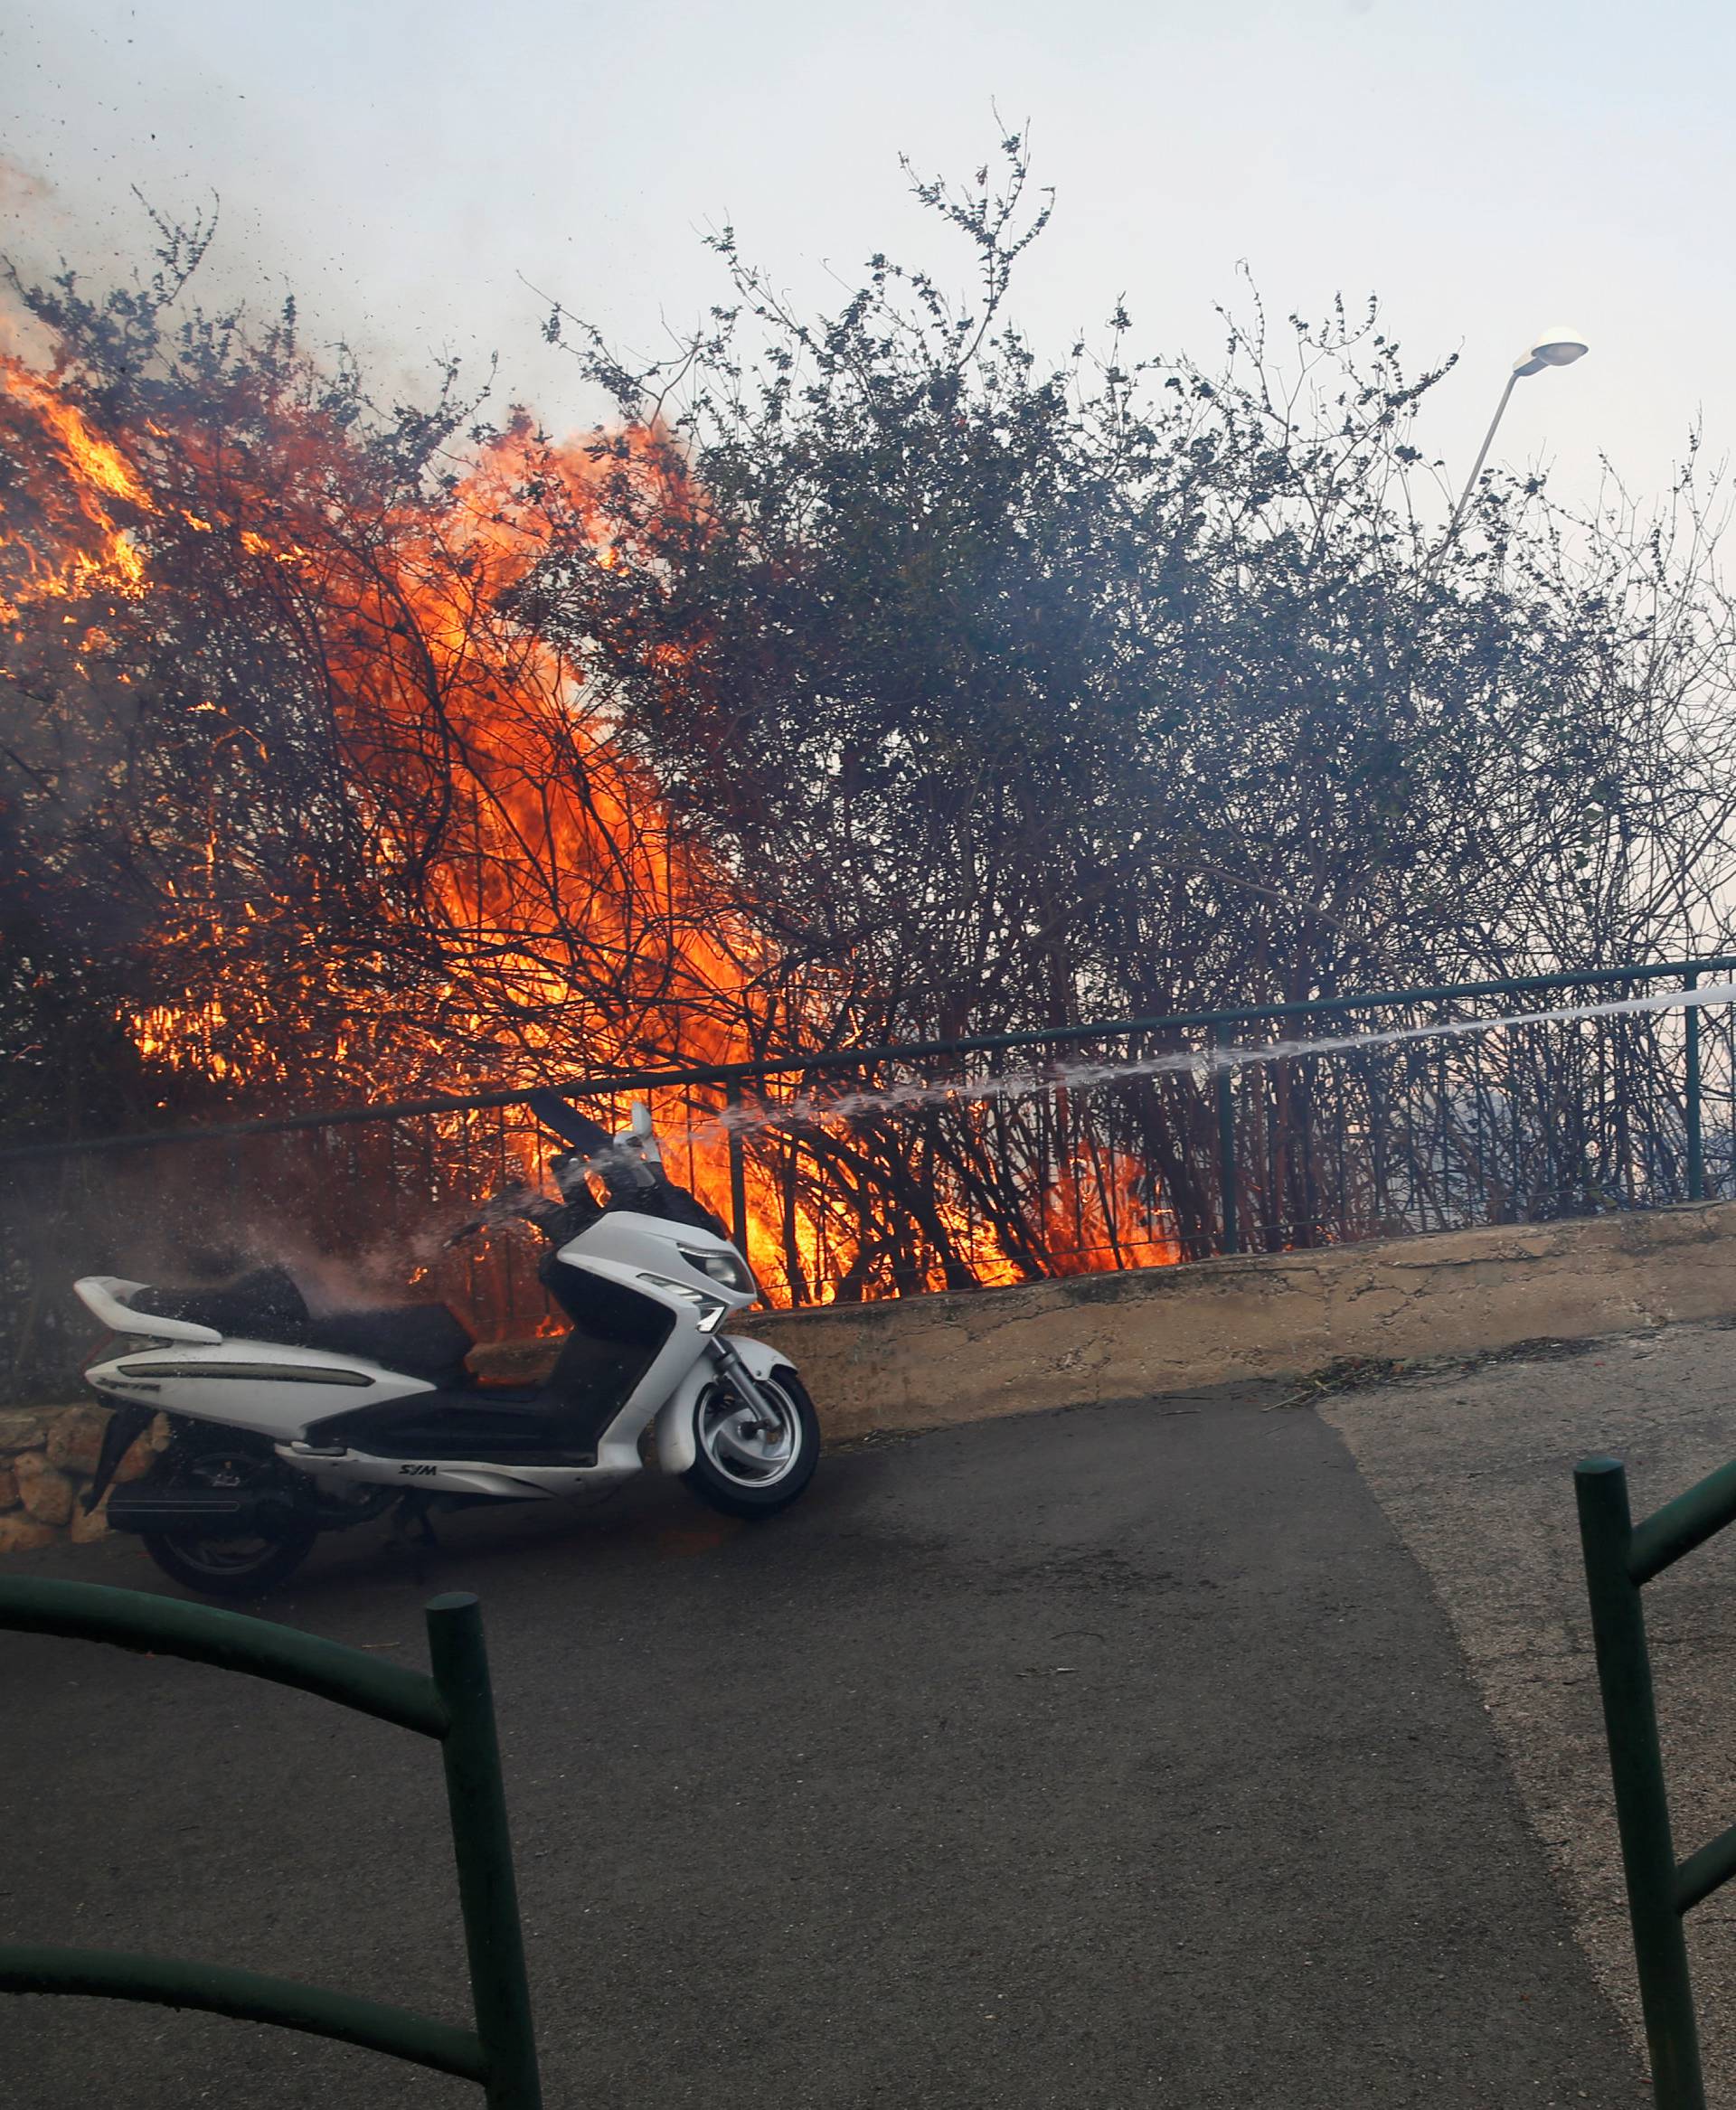 A firefighter extinguishes a wildfire in the northern city of Haifa, Israel 